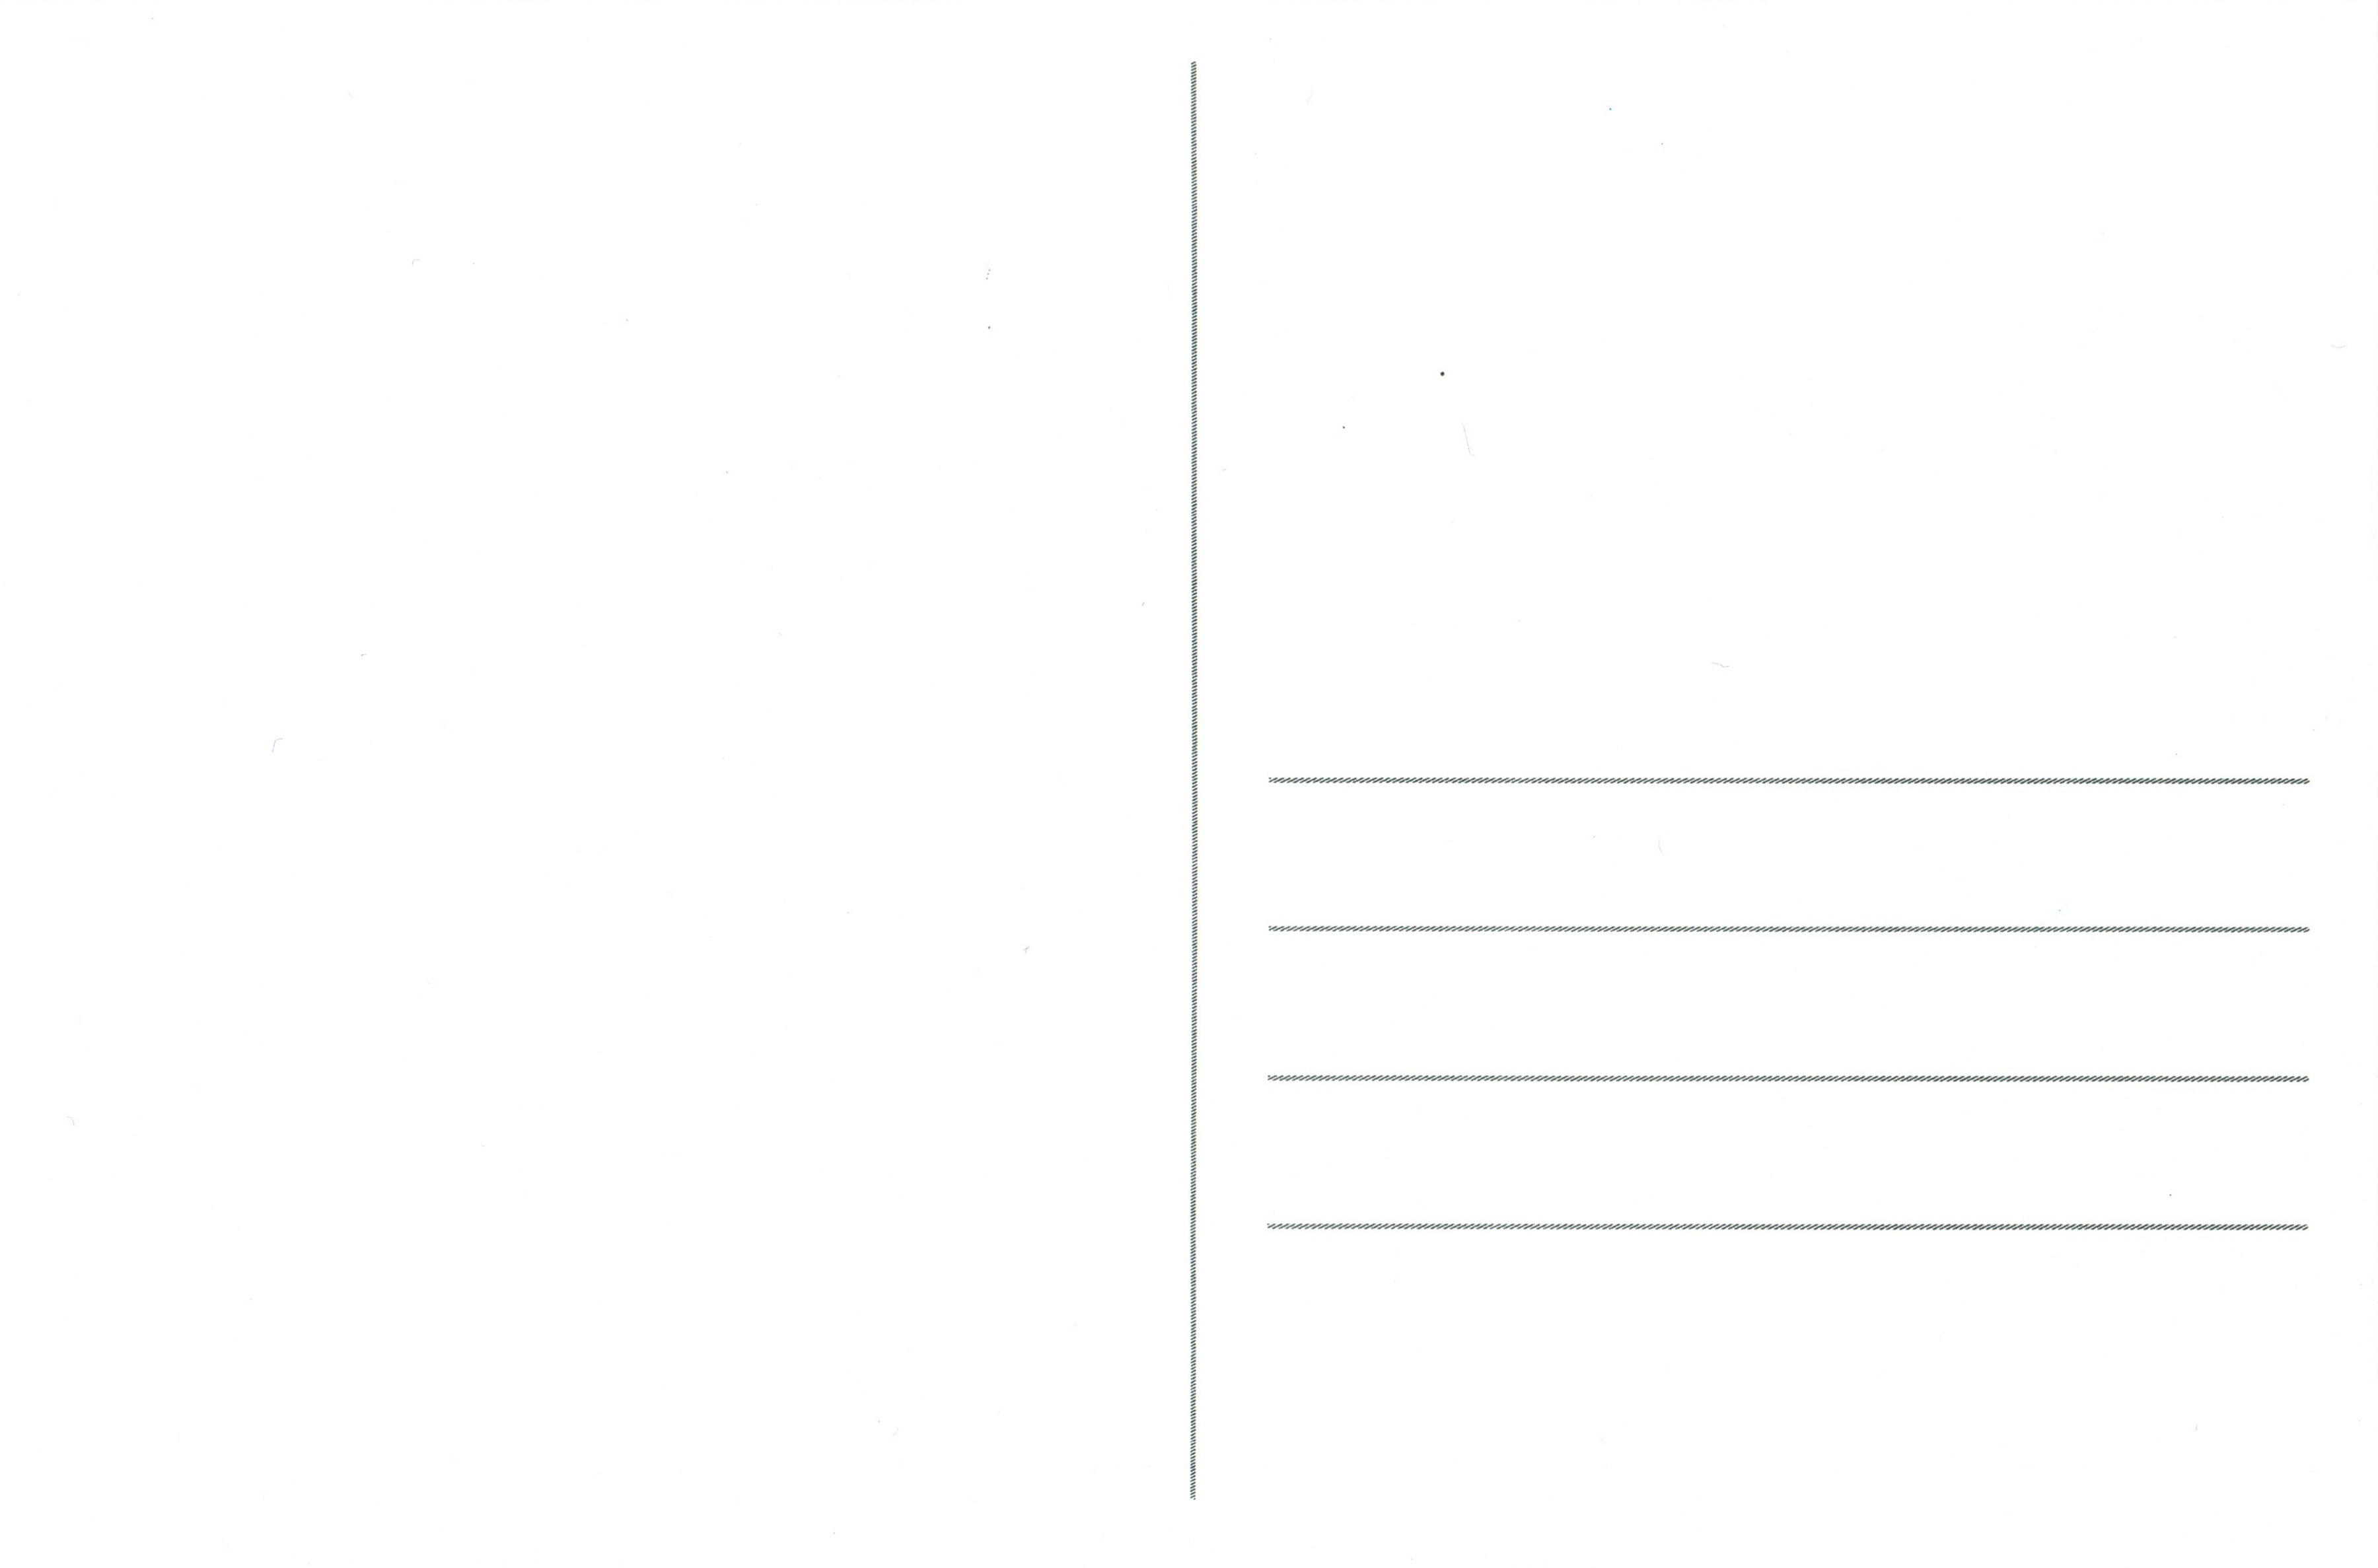 a blank postcard with a vertical line in the middle and four horizontal lines on the right side